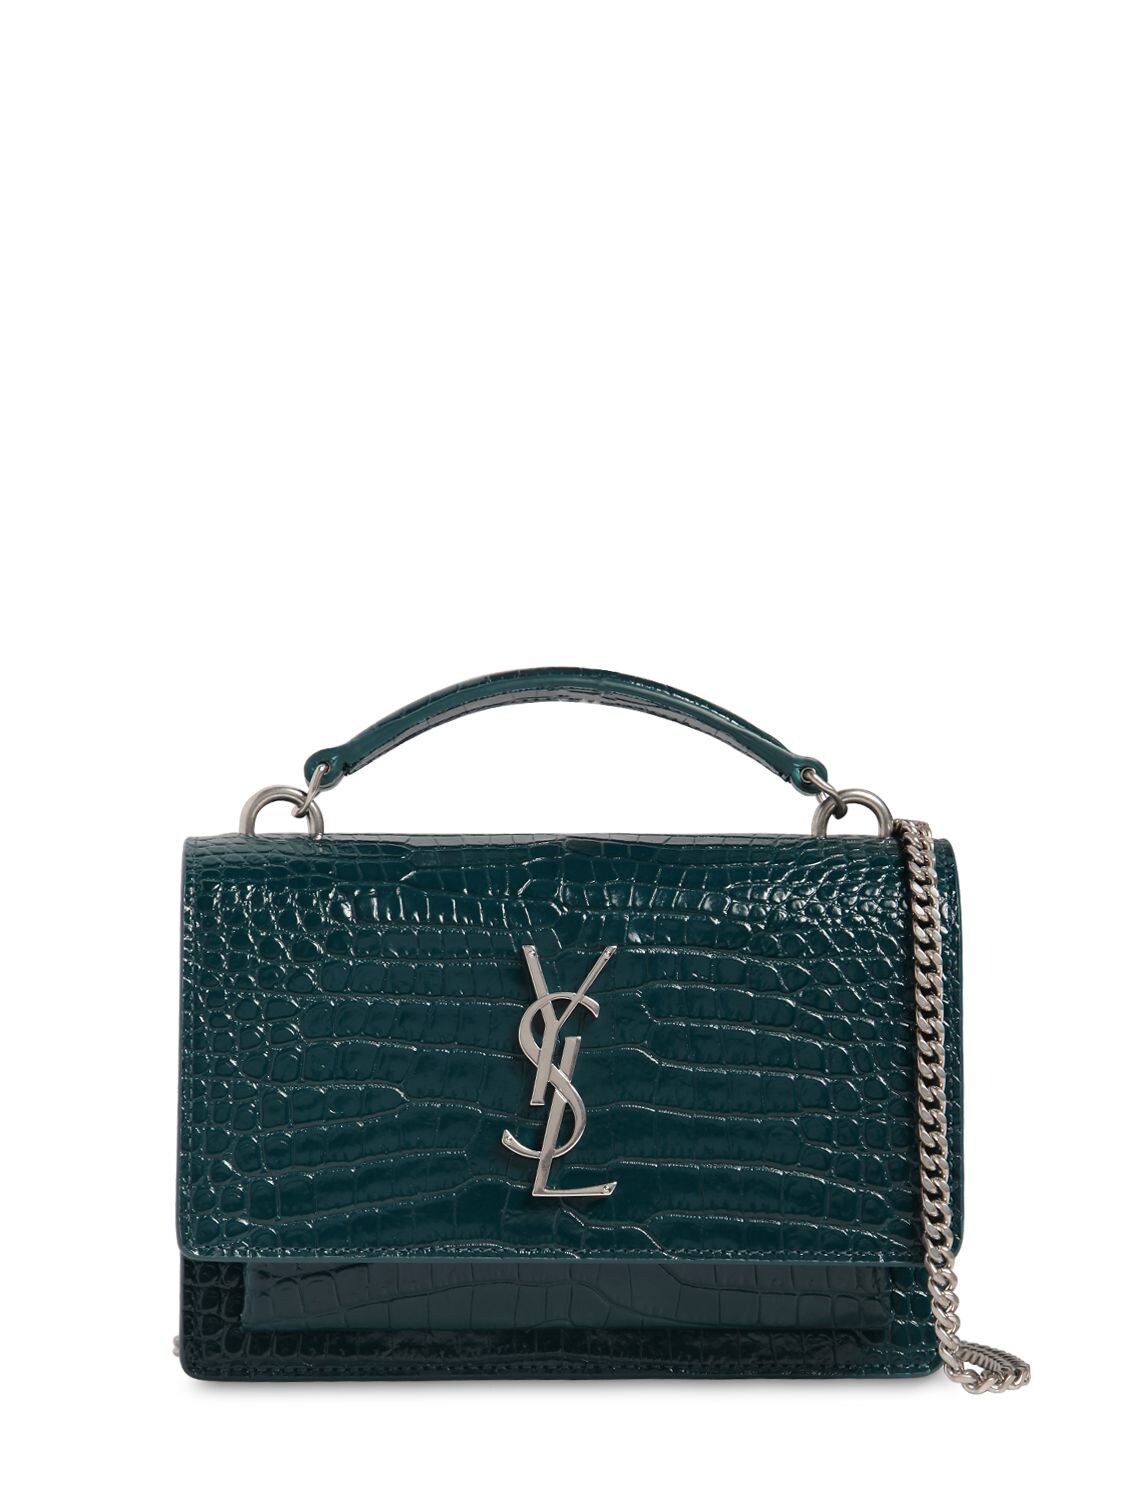 Saint Laurent Small Sunset Croc Embossed Leather Bag In Green